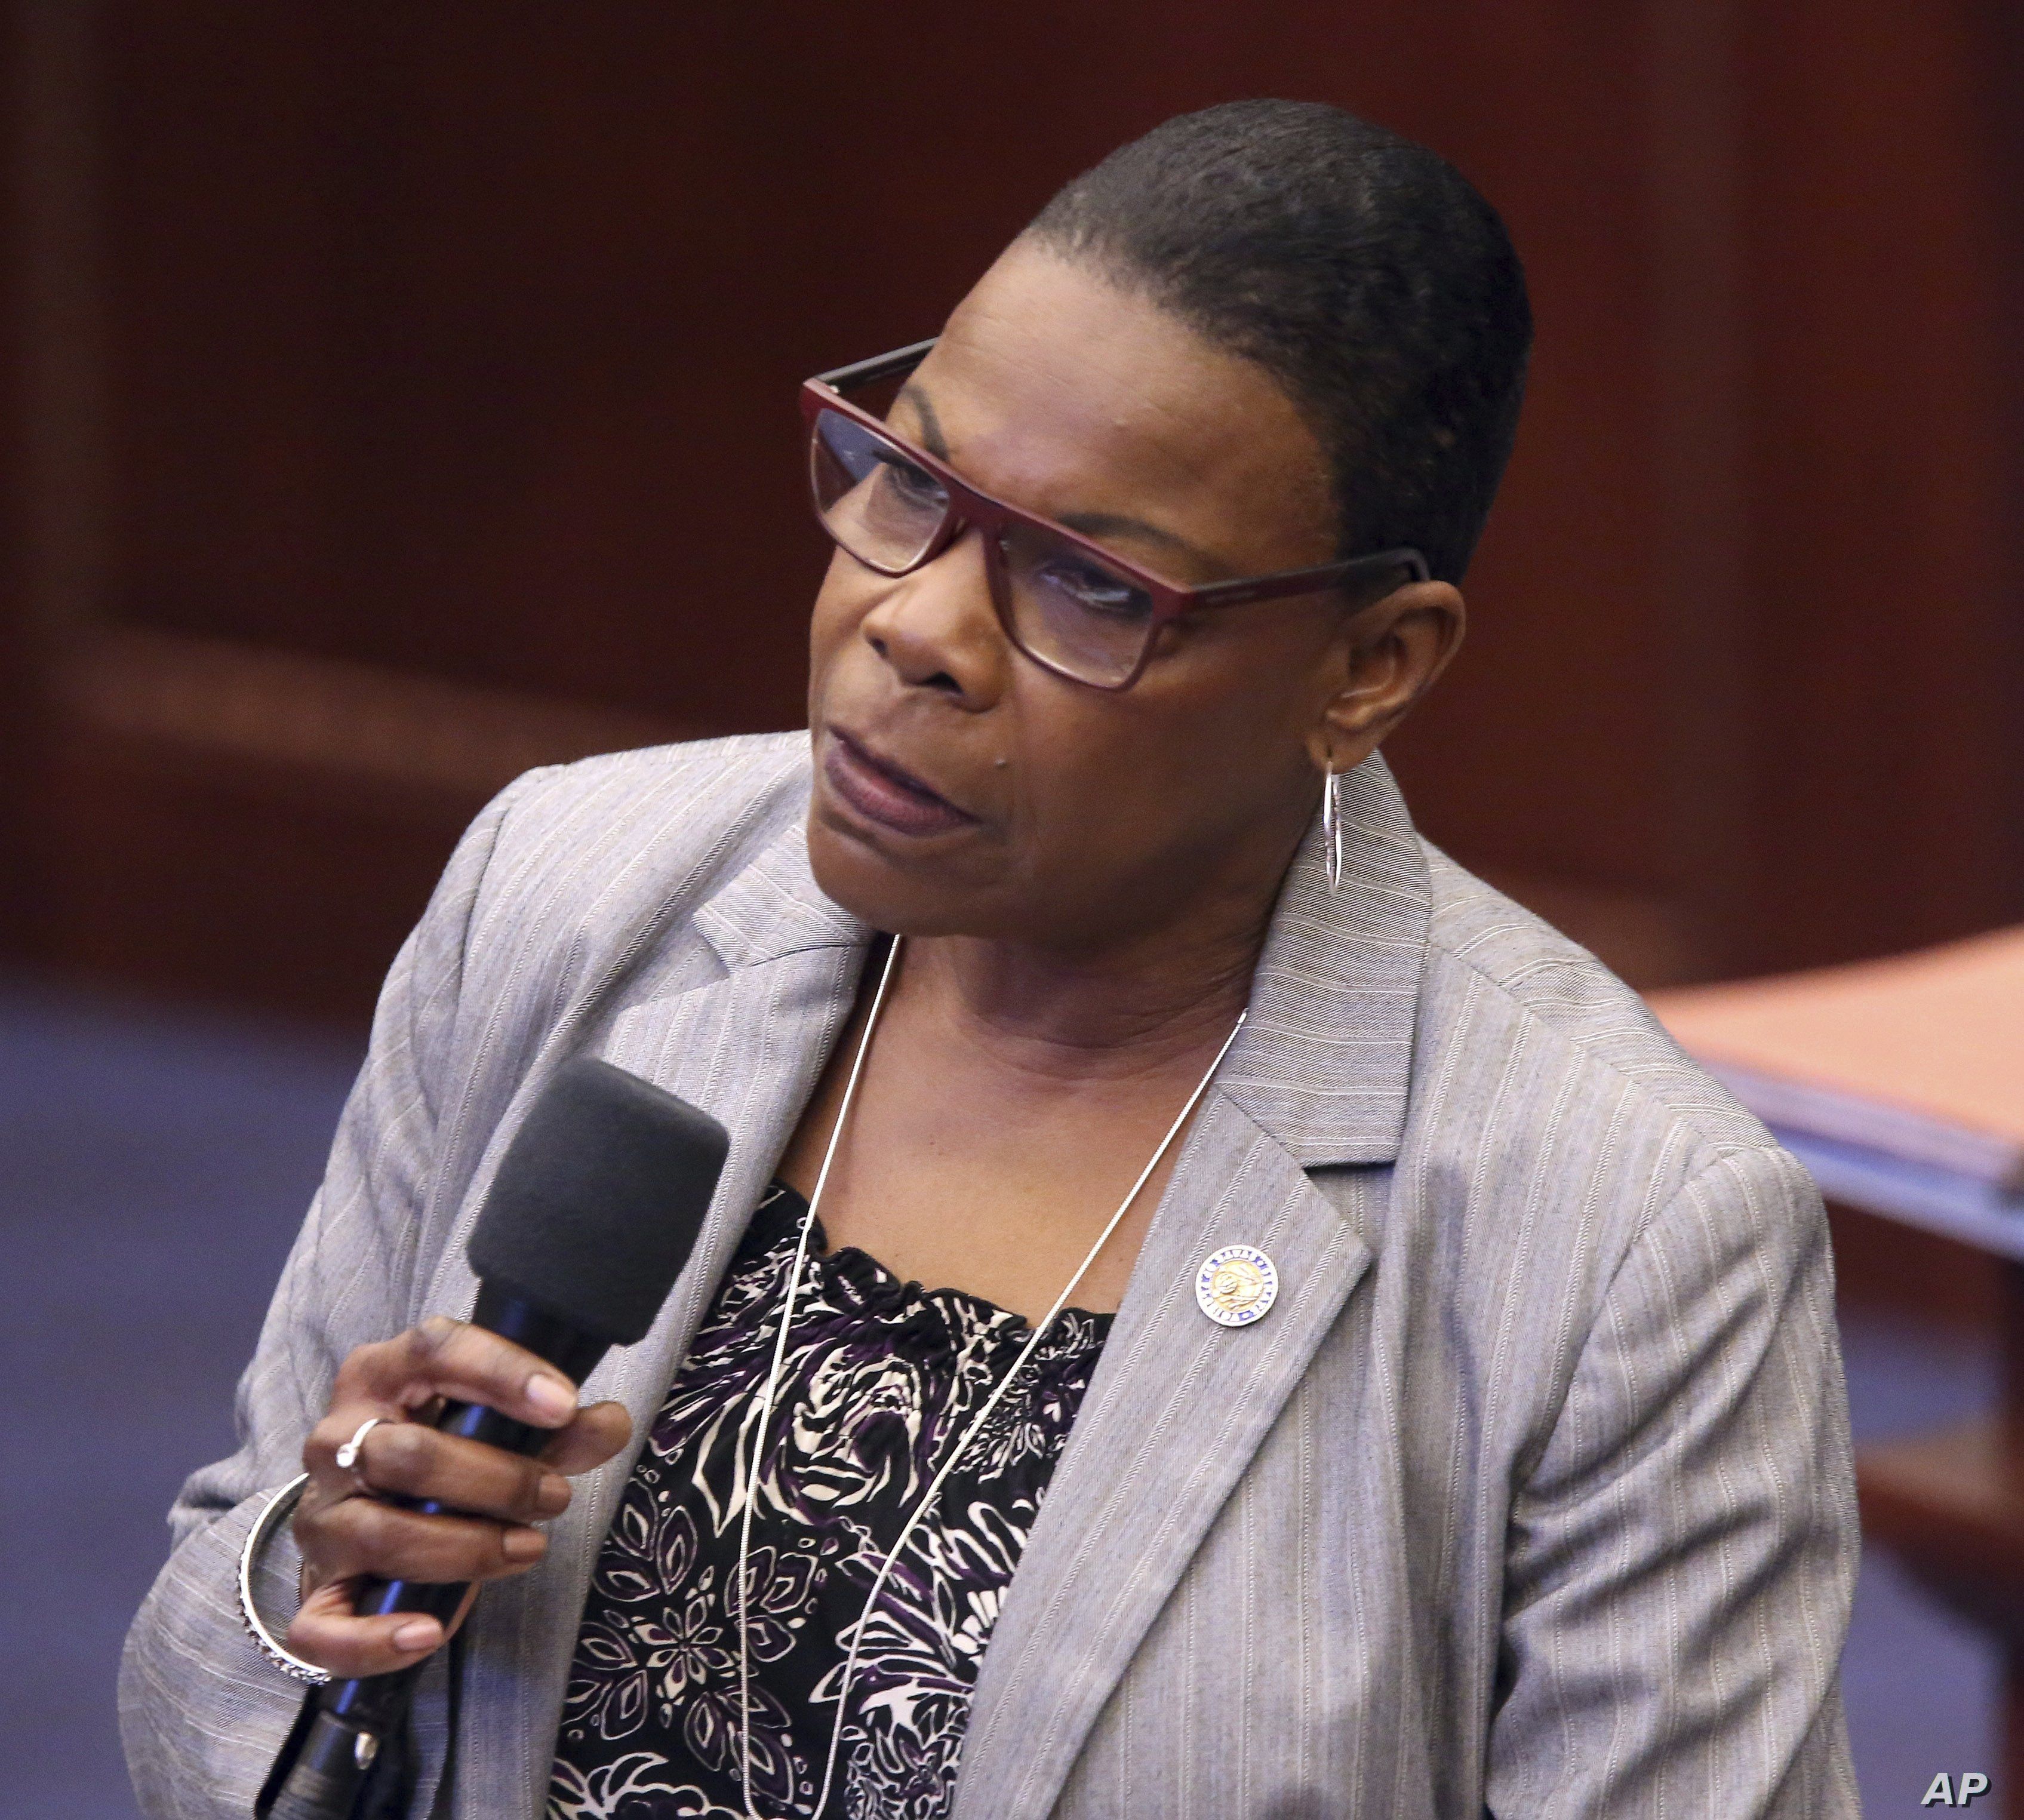 Sen. Audrey Gibson, D-Jacksonville, debates on a bill to allow teachers to be armed during session Wednesday April 17, 2019, in Tallahassee, Fla. (AP Photo/Steve Cannon)